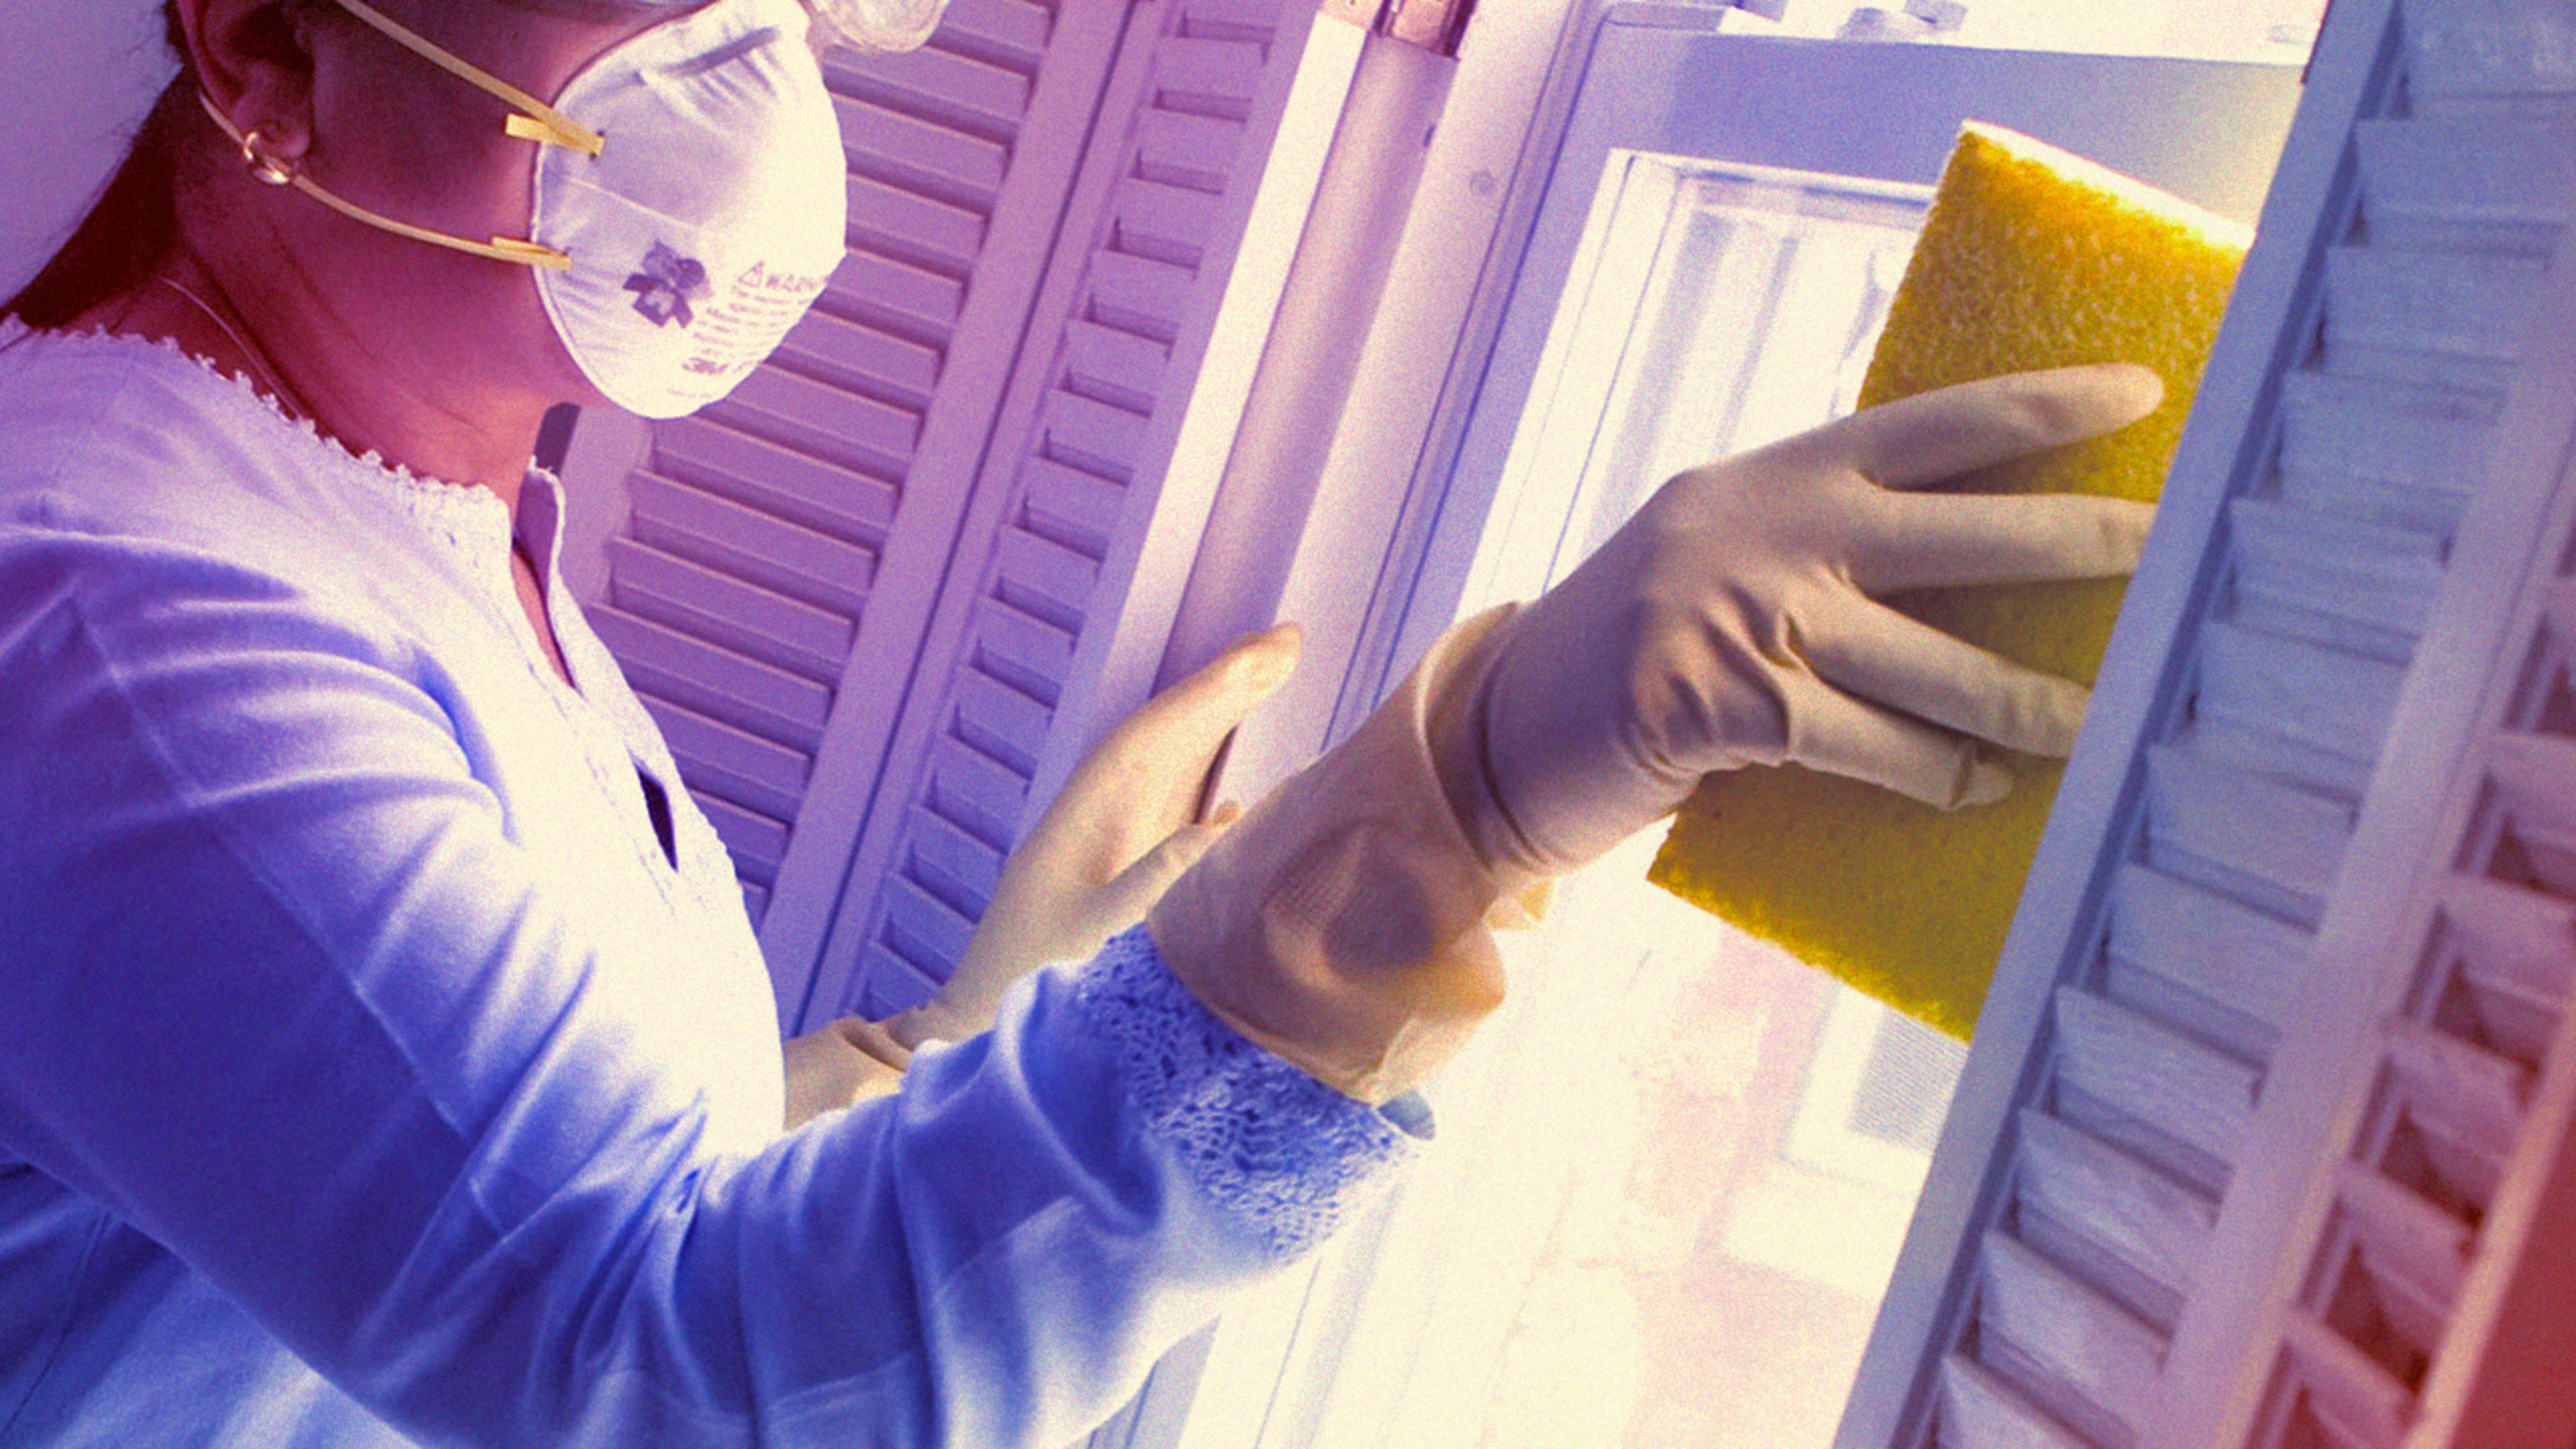 Housecleaning can protect you from coronavirus. Here’s how the CDC says to do it right